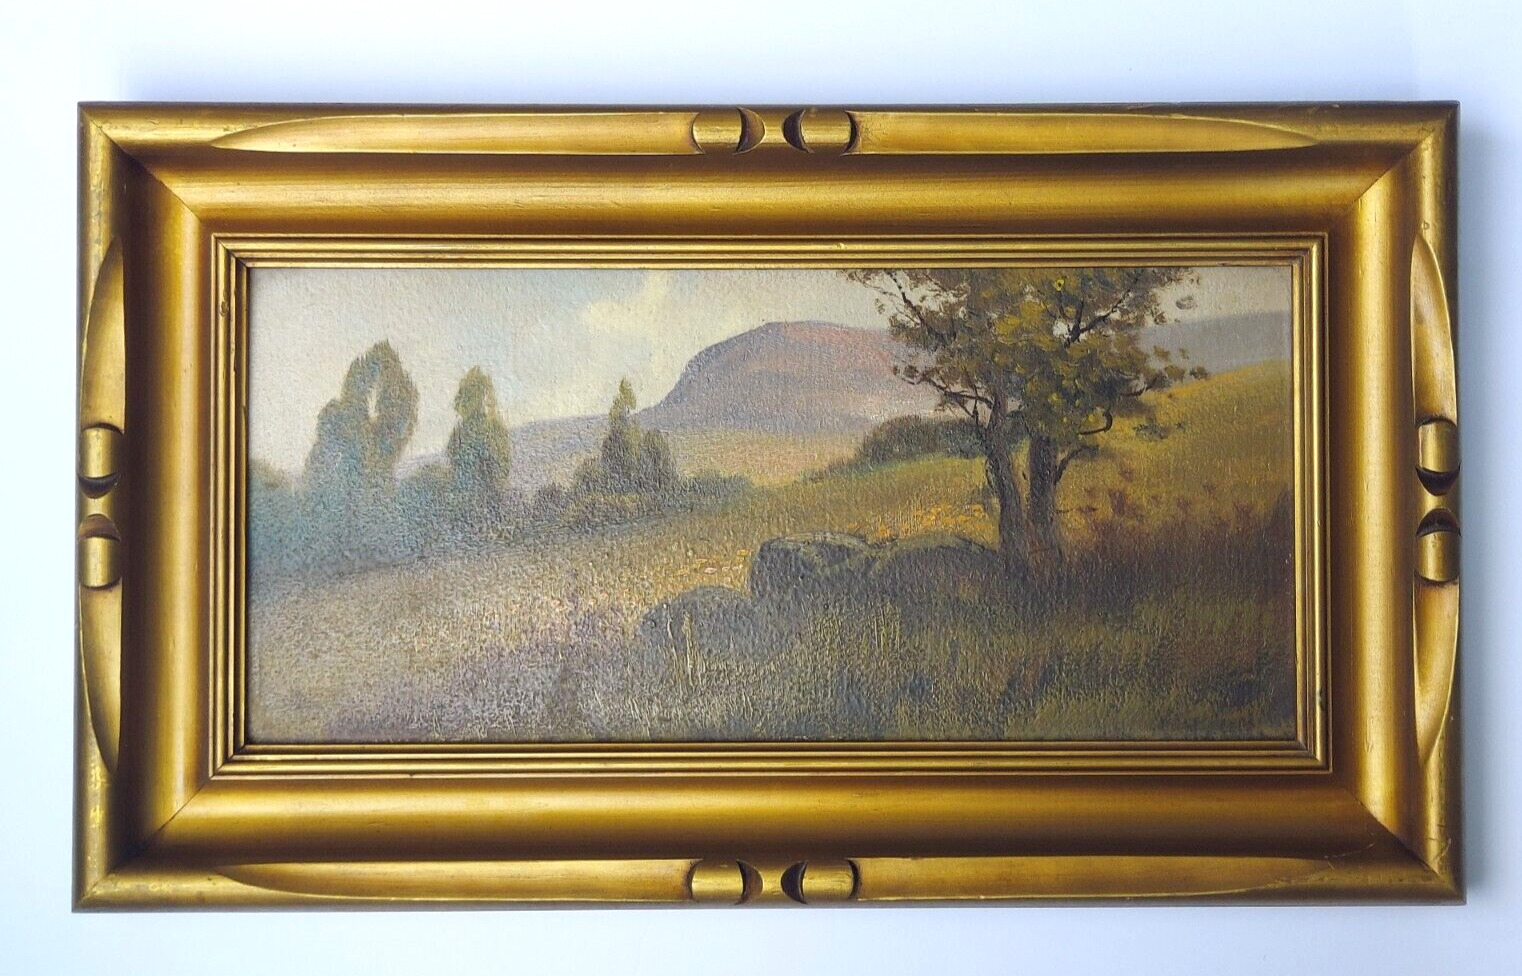 1920s CARVED GOLD FRAME & LANDSCAPE OIL PAINTING Sold by The Broadway Stores